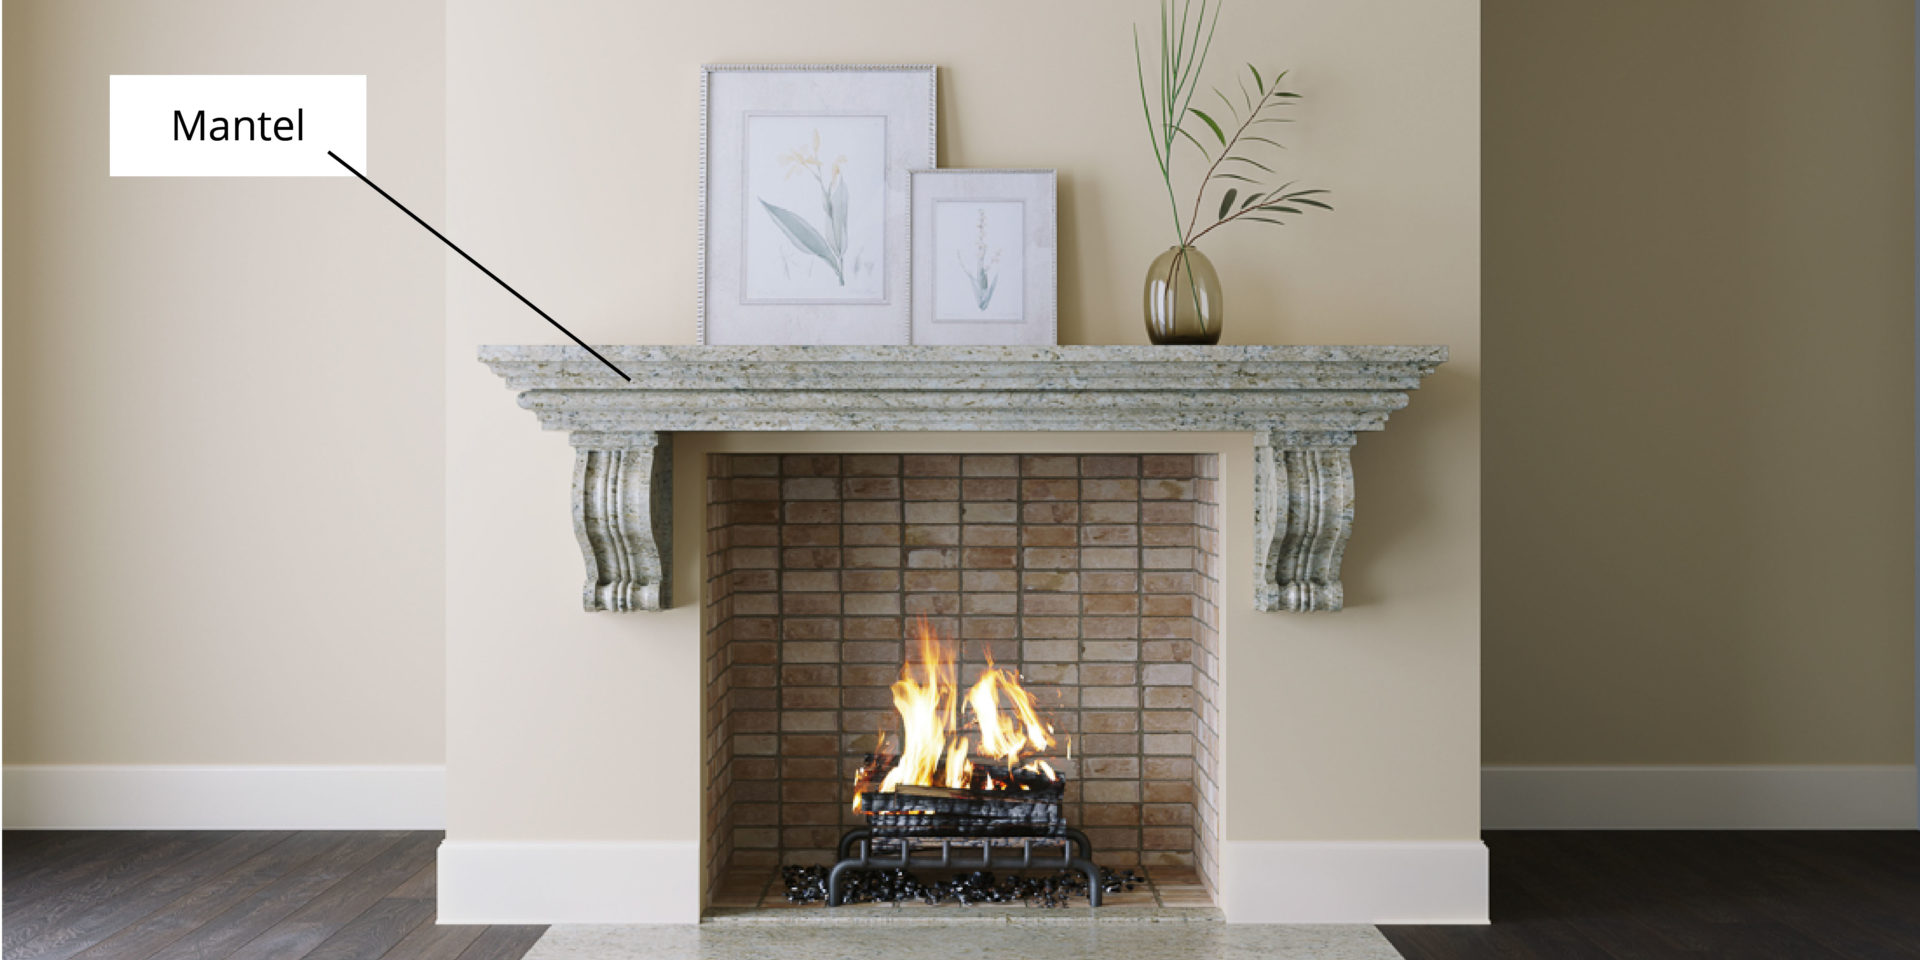 Fireplace Terms 101 The Ultimate Guide, What Are Parts Of A Fireplace Called